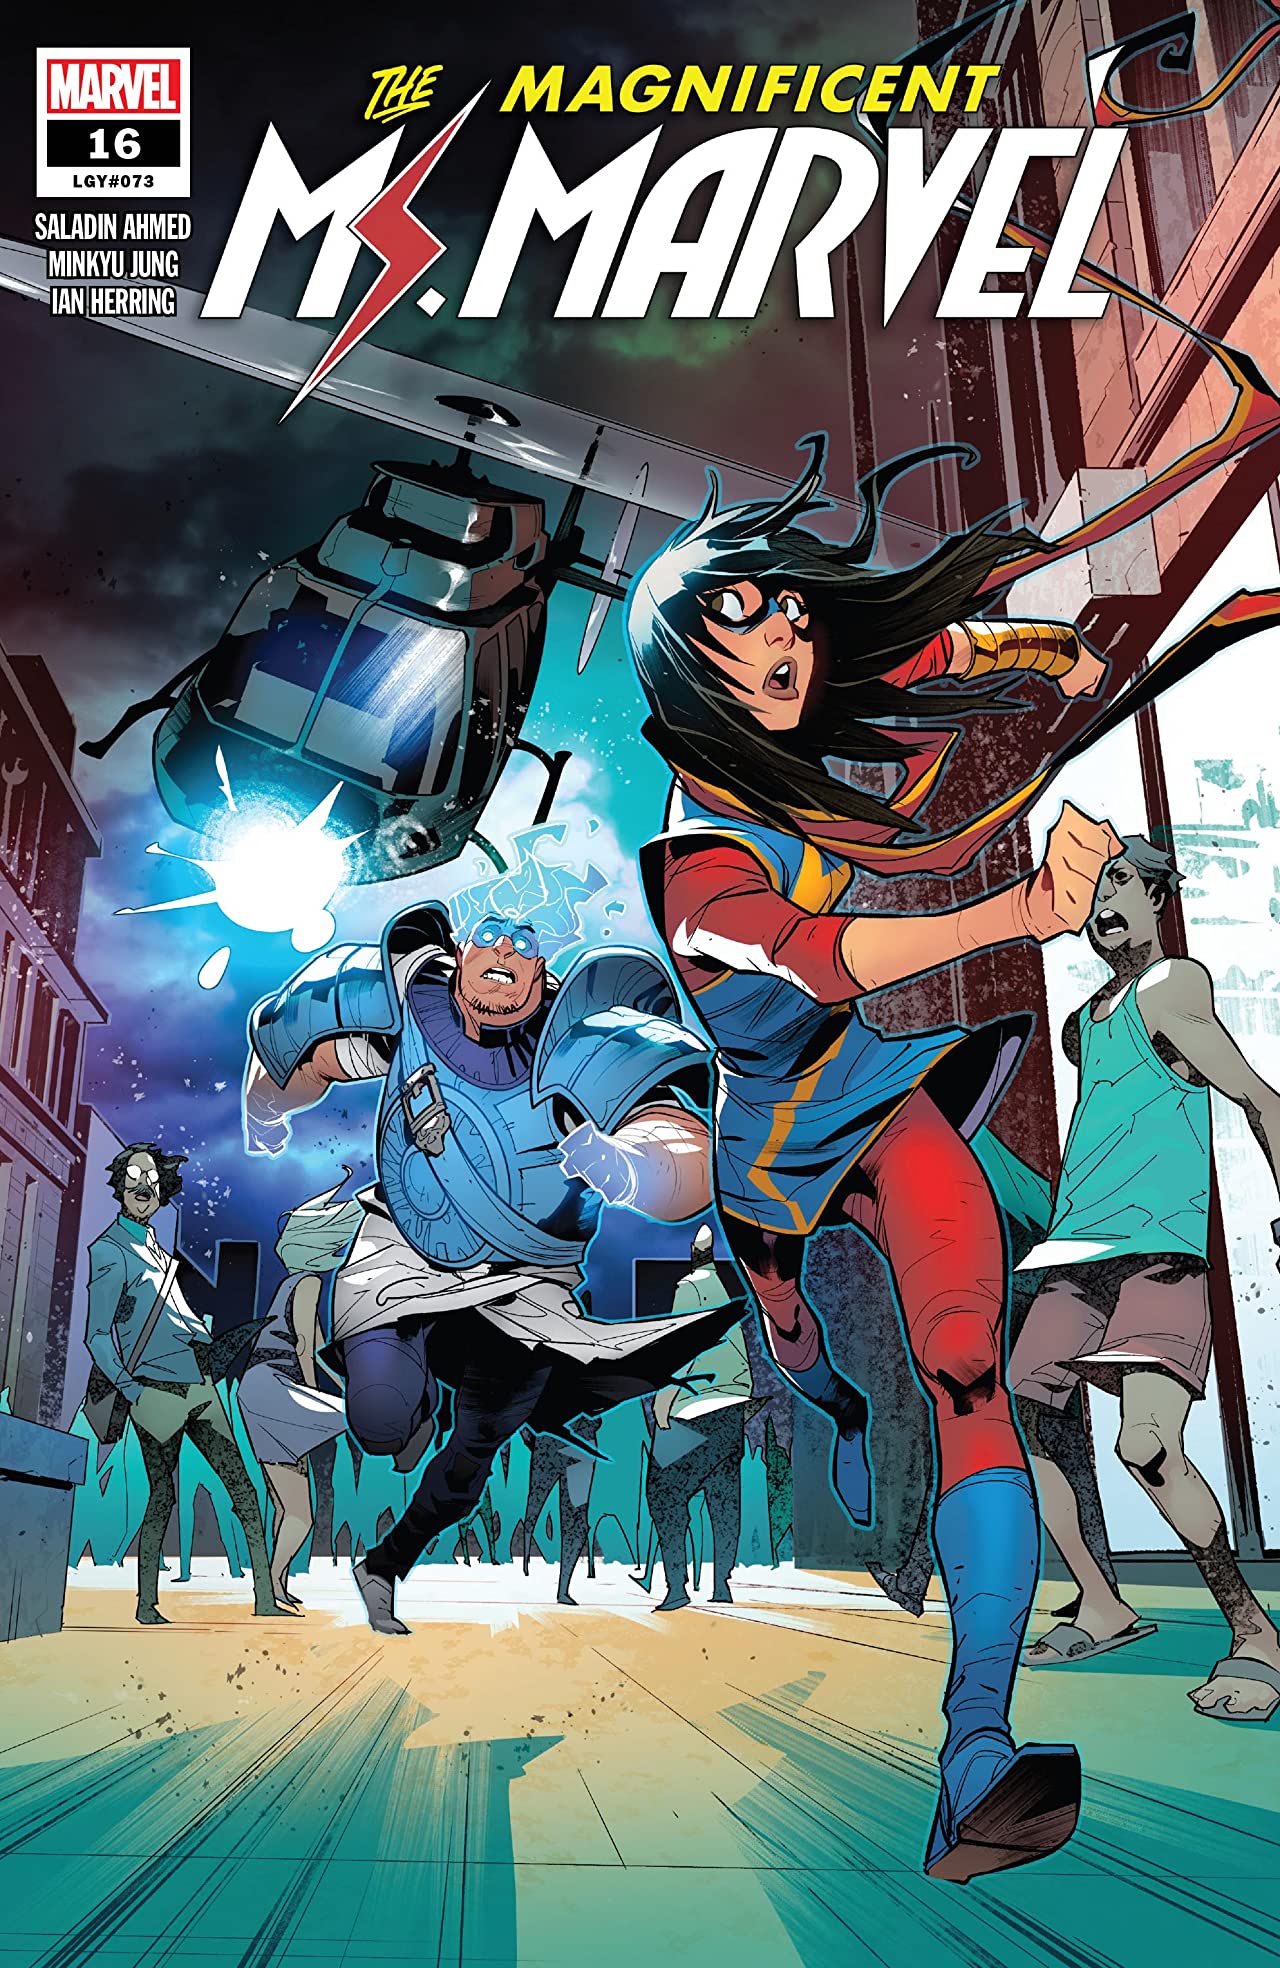 Magnificent Ms Marvel #16 Out (2019)